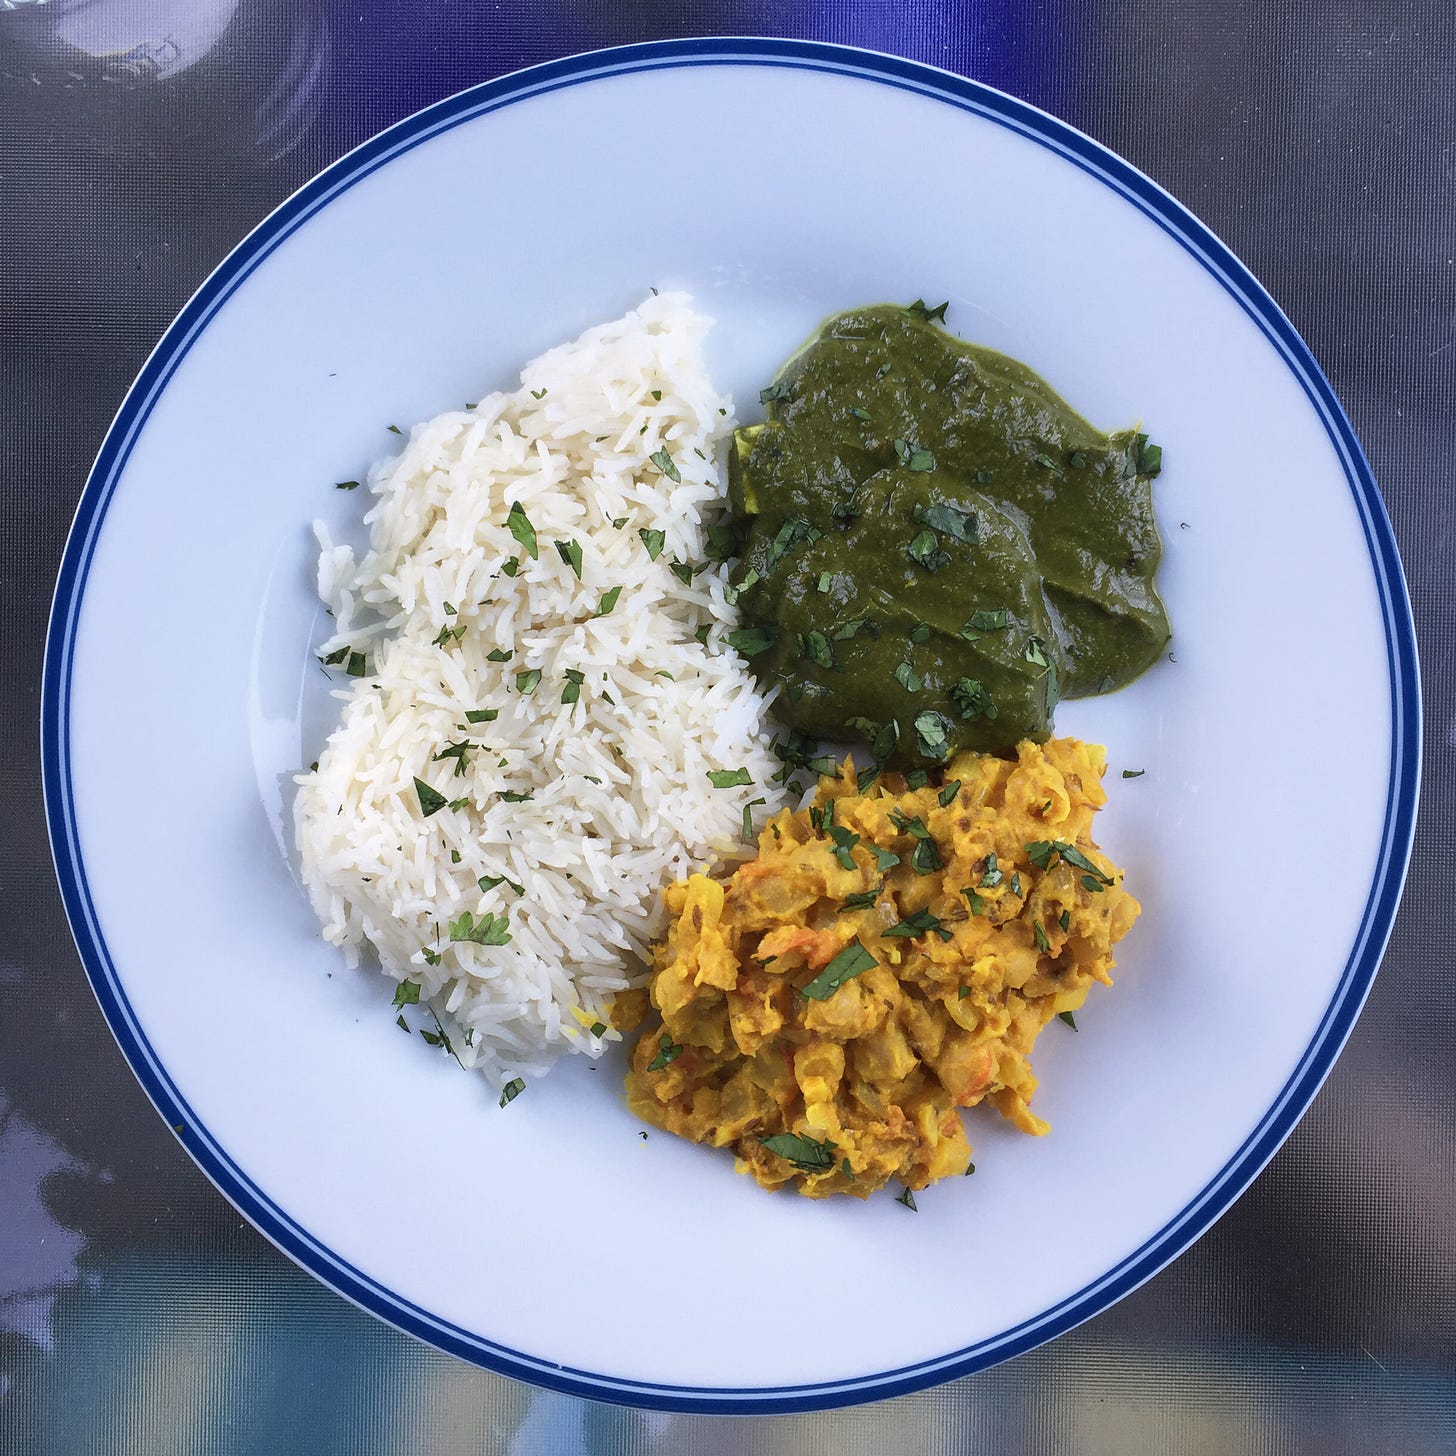 a white plate of basmati rice, dark green saag paneer, and yellow chana masala in each third of the plate. Cilantro is scattered over the top.